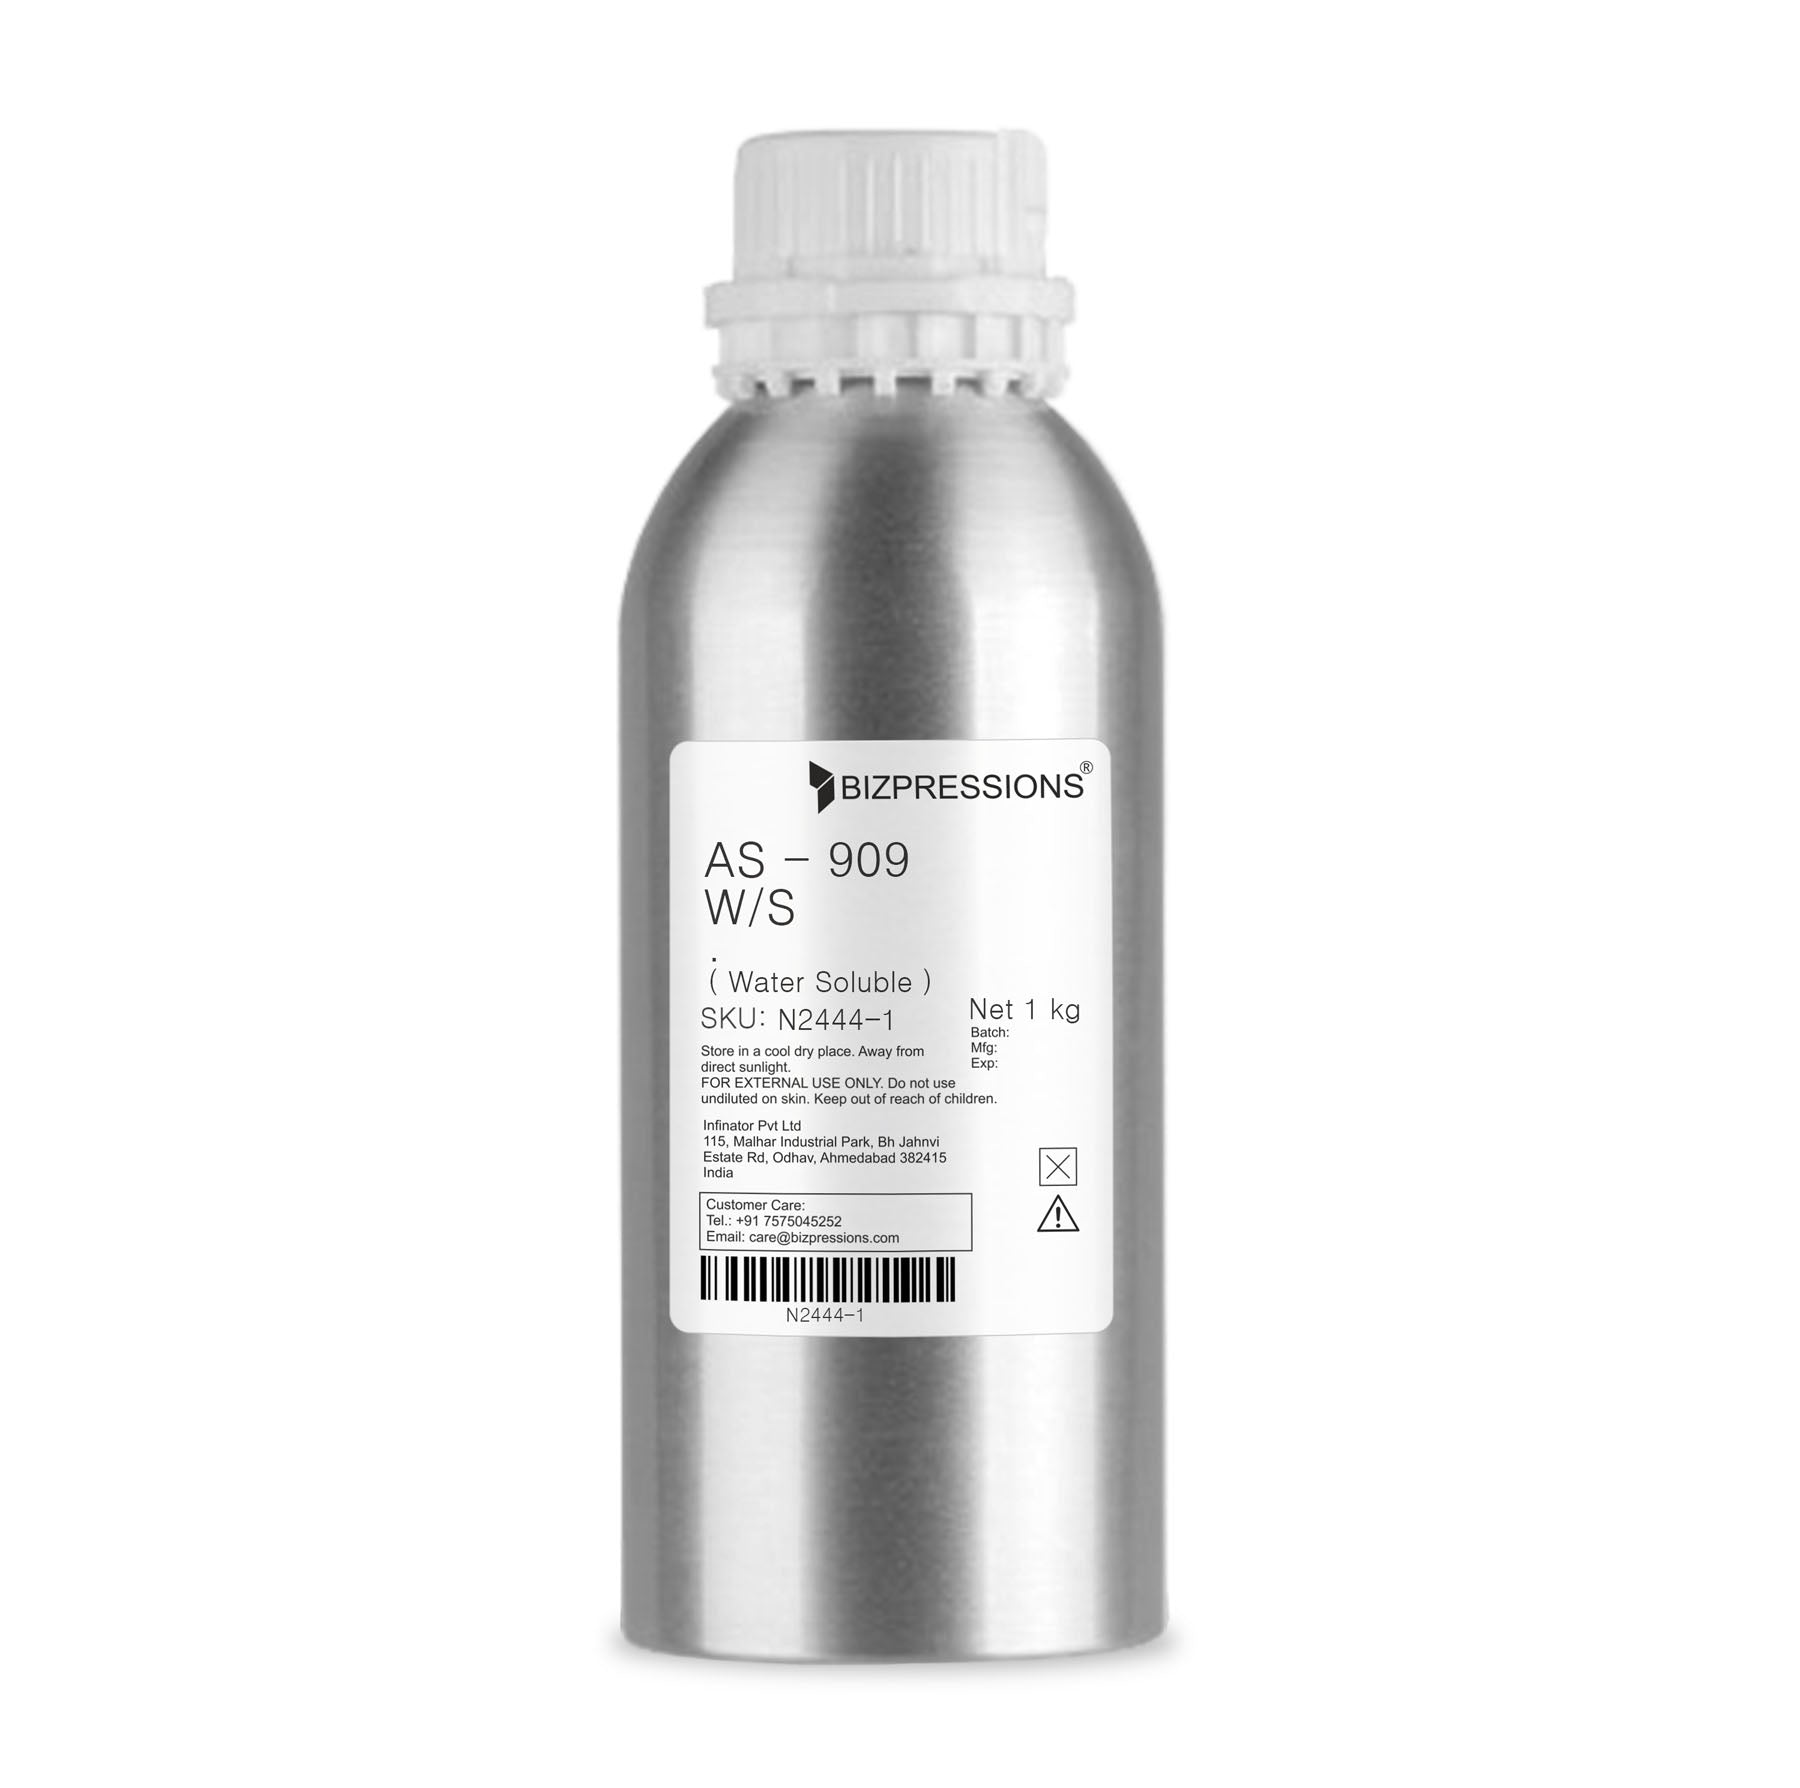 AS - 909 W/S - Fragrance ( Water Soluble ) - 1 kg